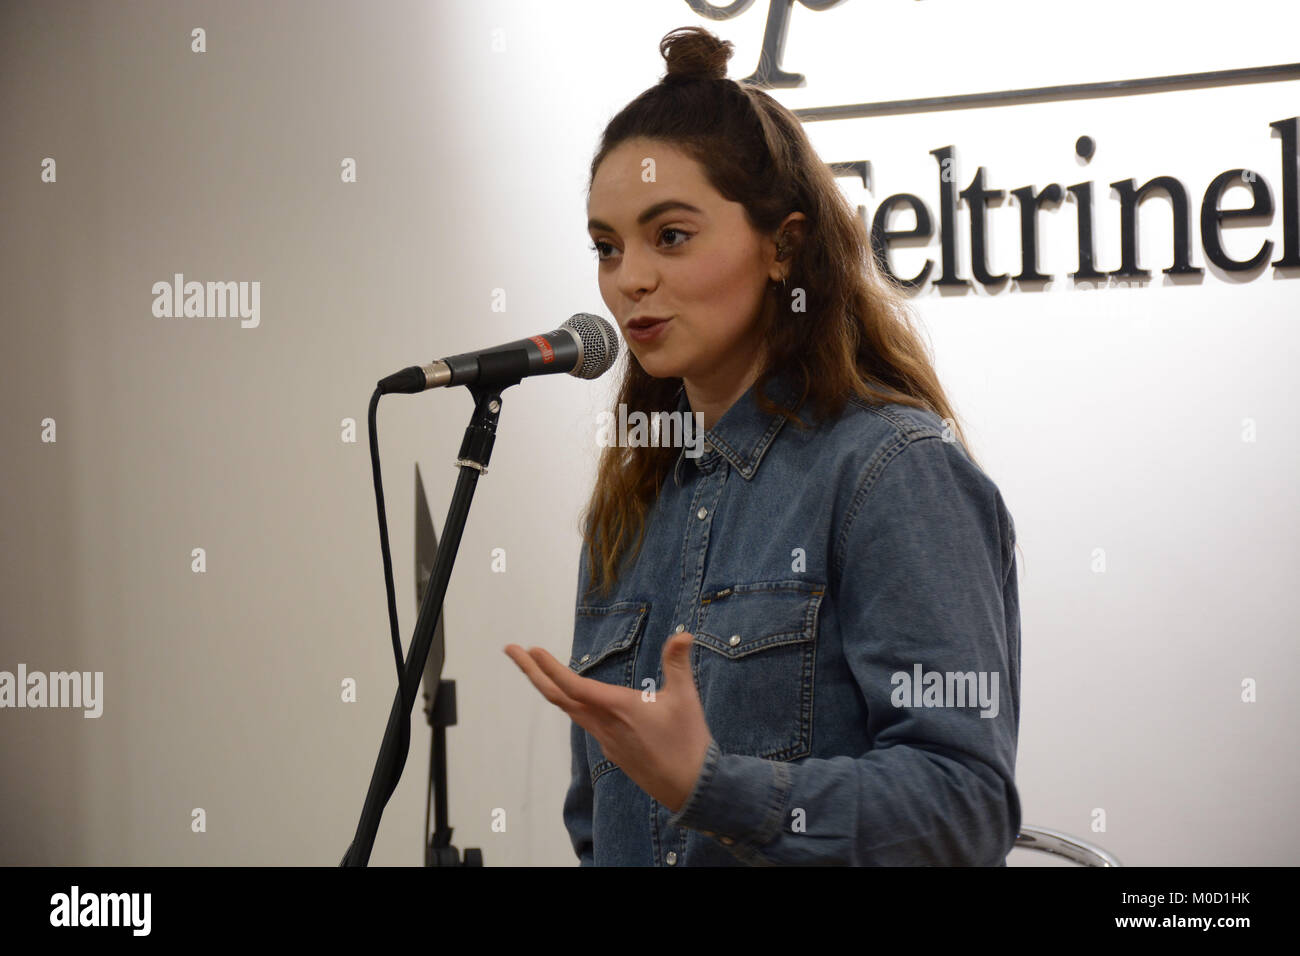 Naples, Italy. 20th Jan, 2018. Italian singer Francesca Michielin performed at Feltrinelli Library in a mini live and then signed autographs of her's new album '2640'. Credit: Mariano Montella/Alamy Live News Stock Photo